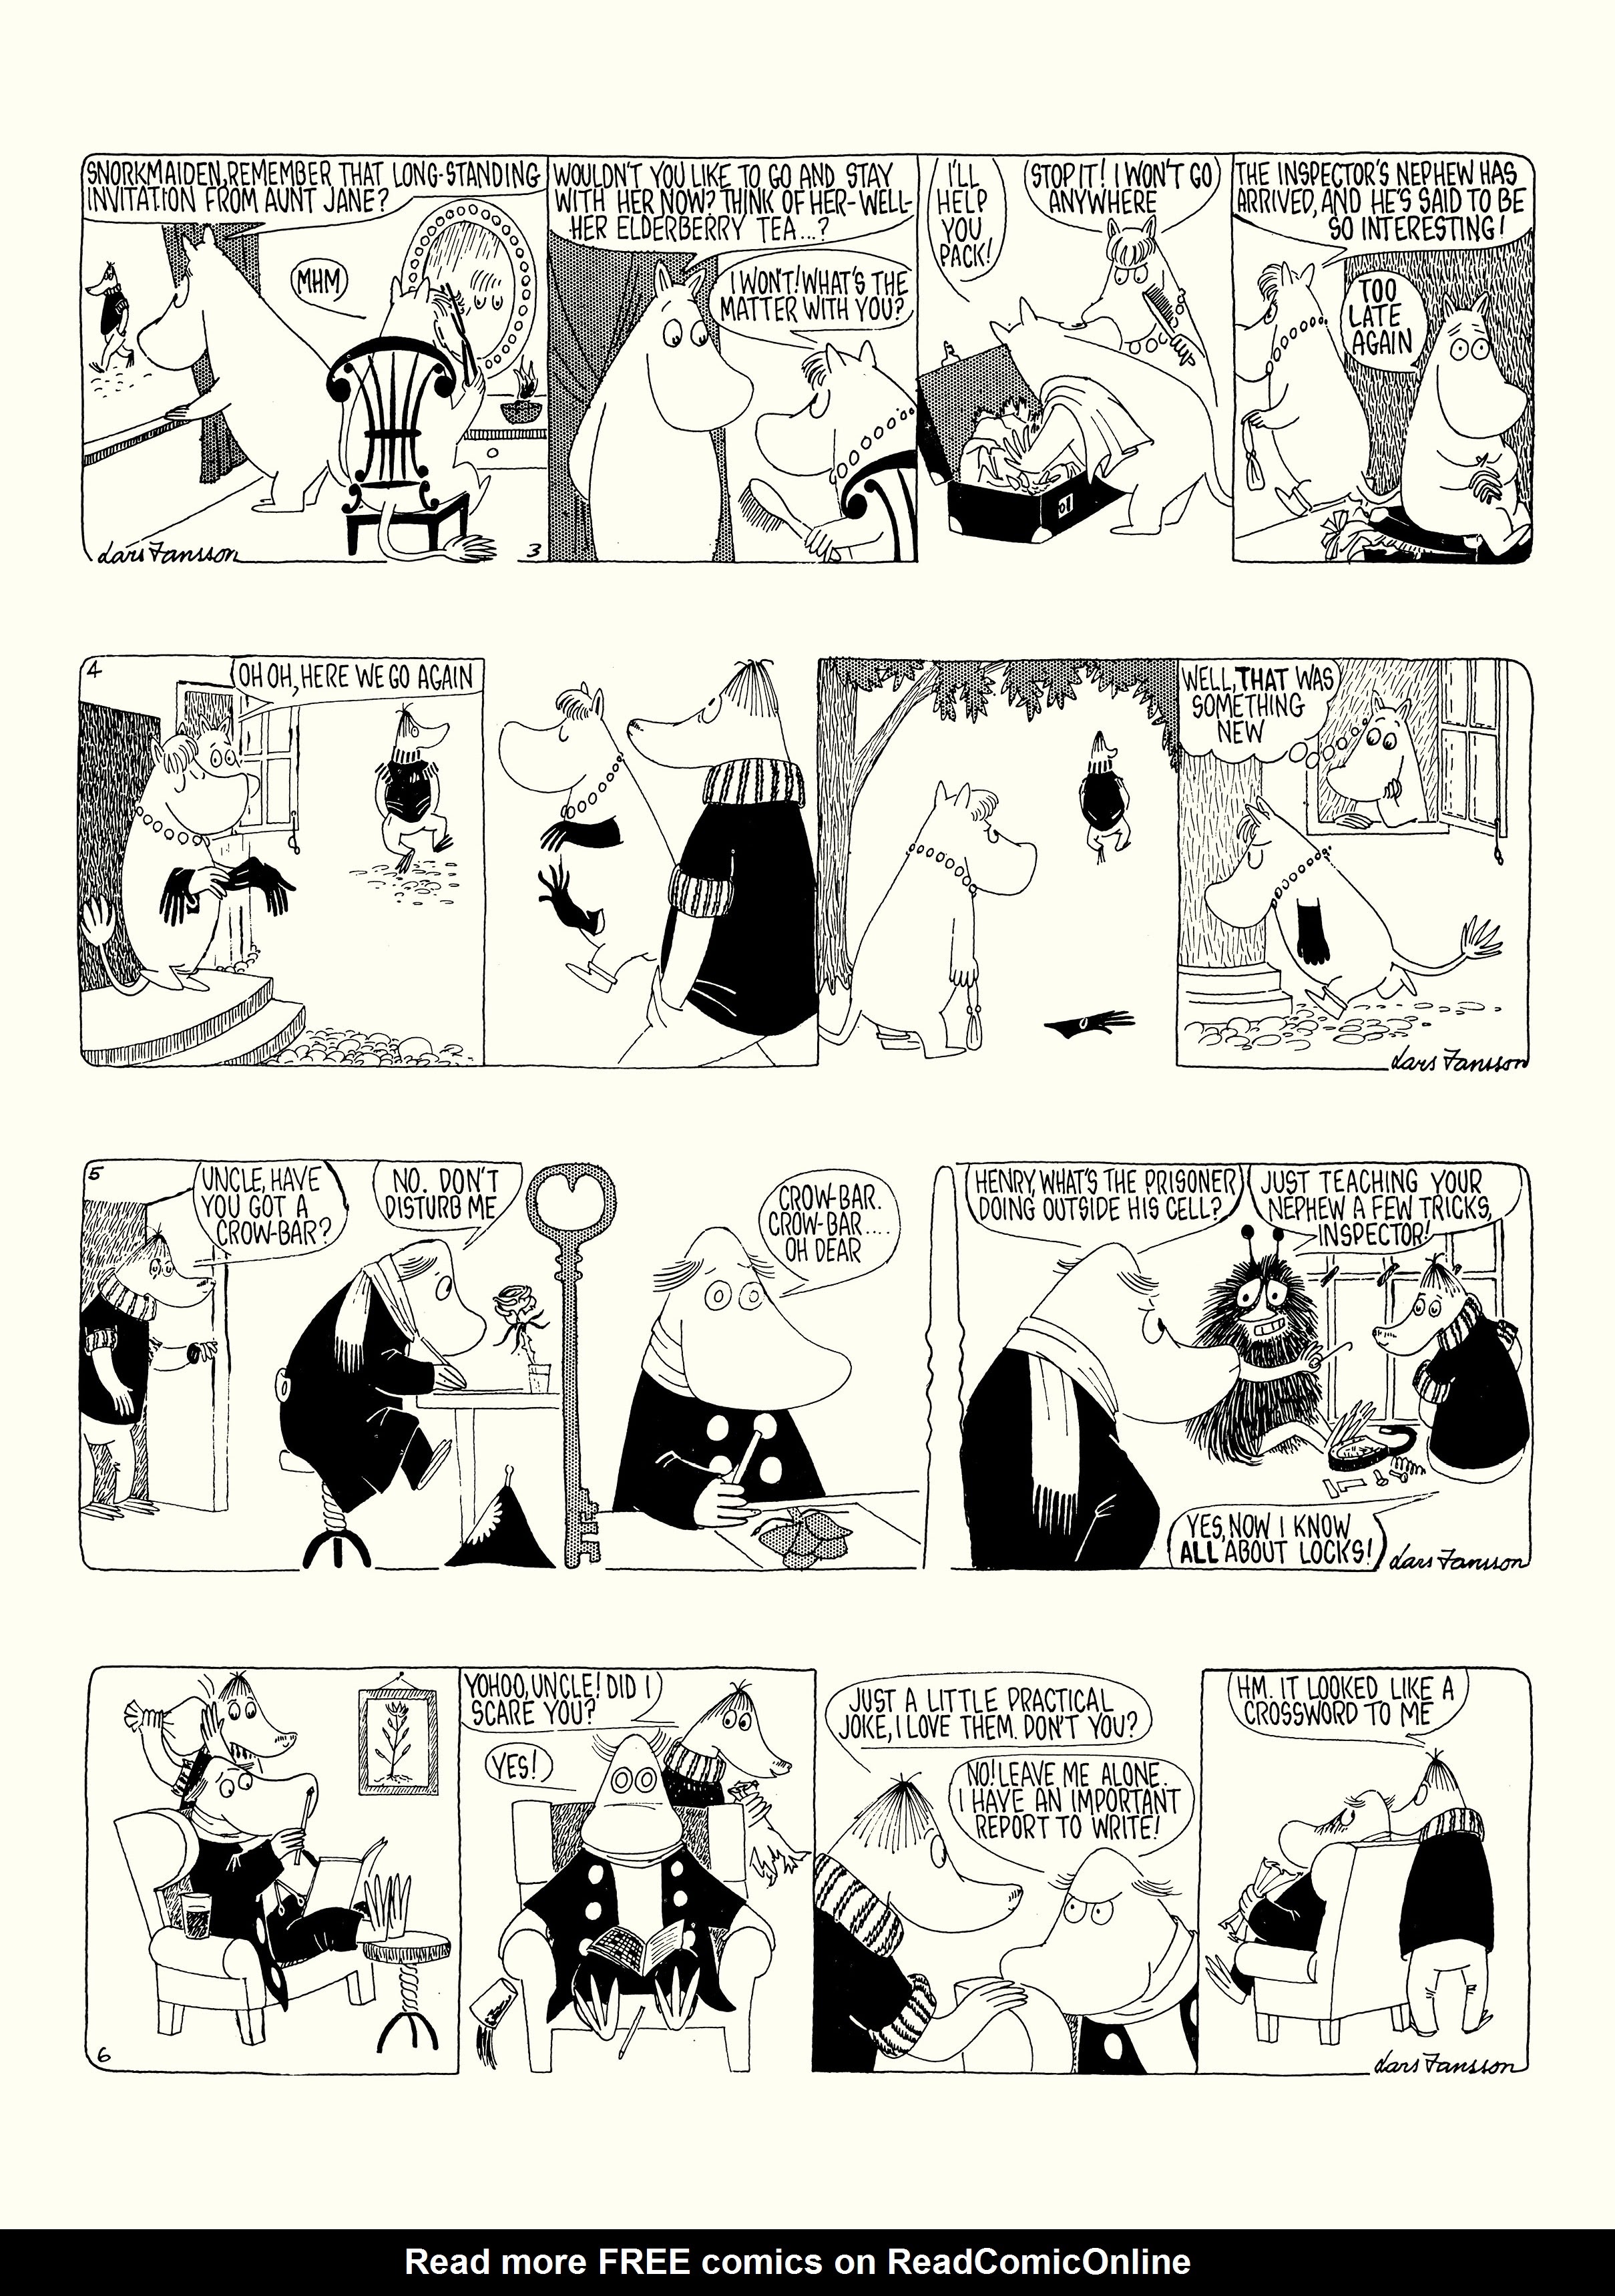 Read online Moomin: The Complete Lars Jansson Comic Strip comic -  Issue # TPB 8 - 72